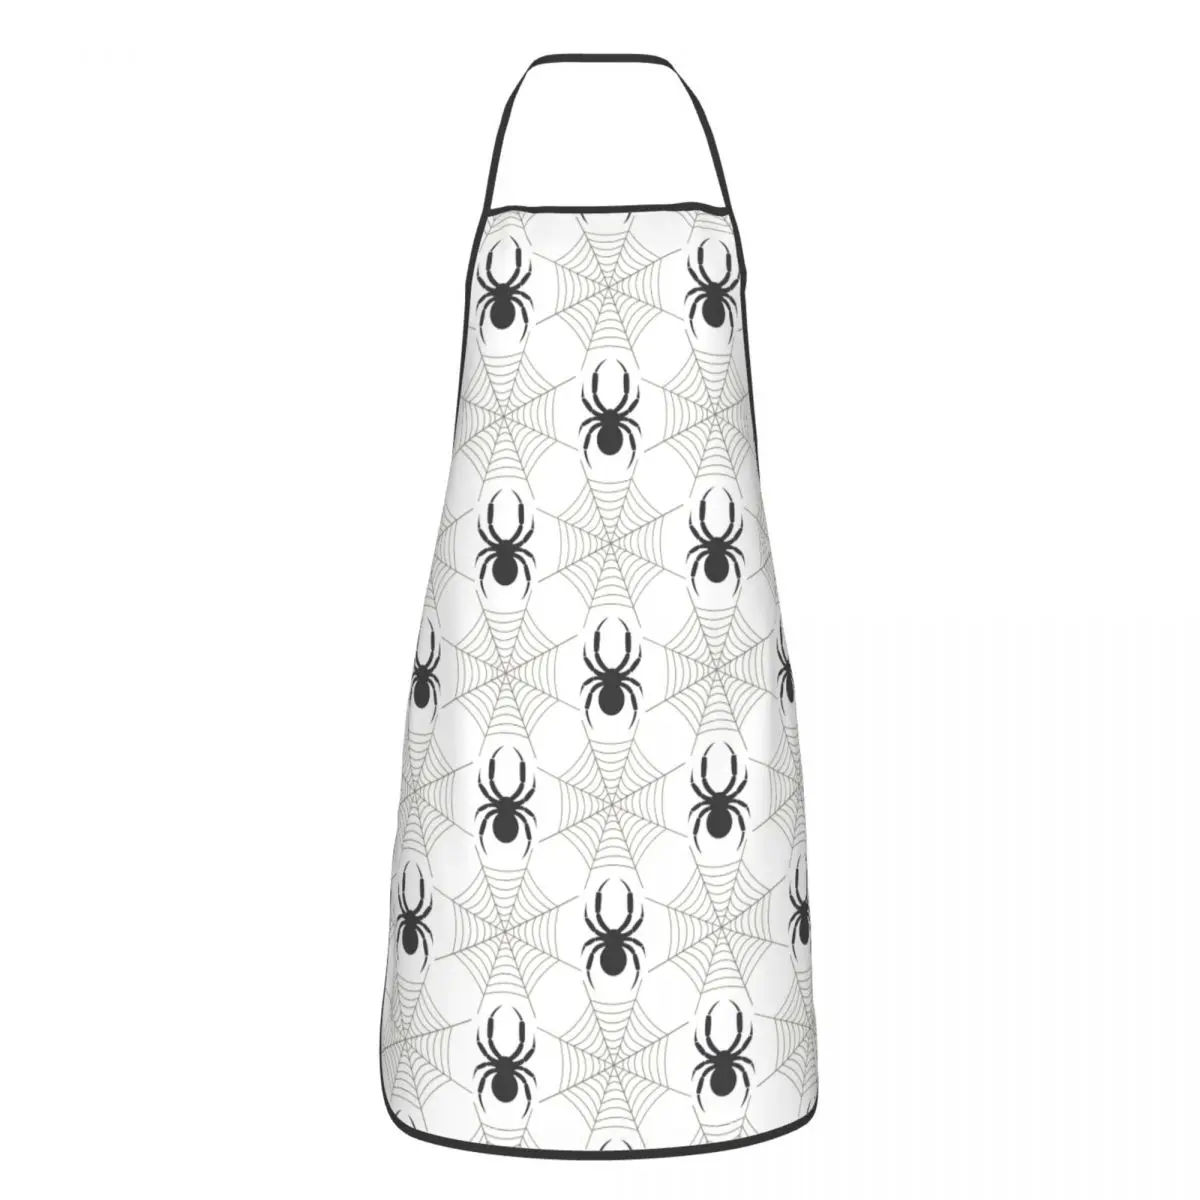 

Spider Webs Polyester Aprons 52*72cm Kitchen Grill Bib Tablier Home Cleaning Gardening Pinafores for Men Women Chef